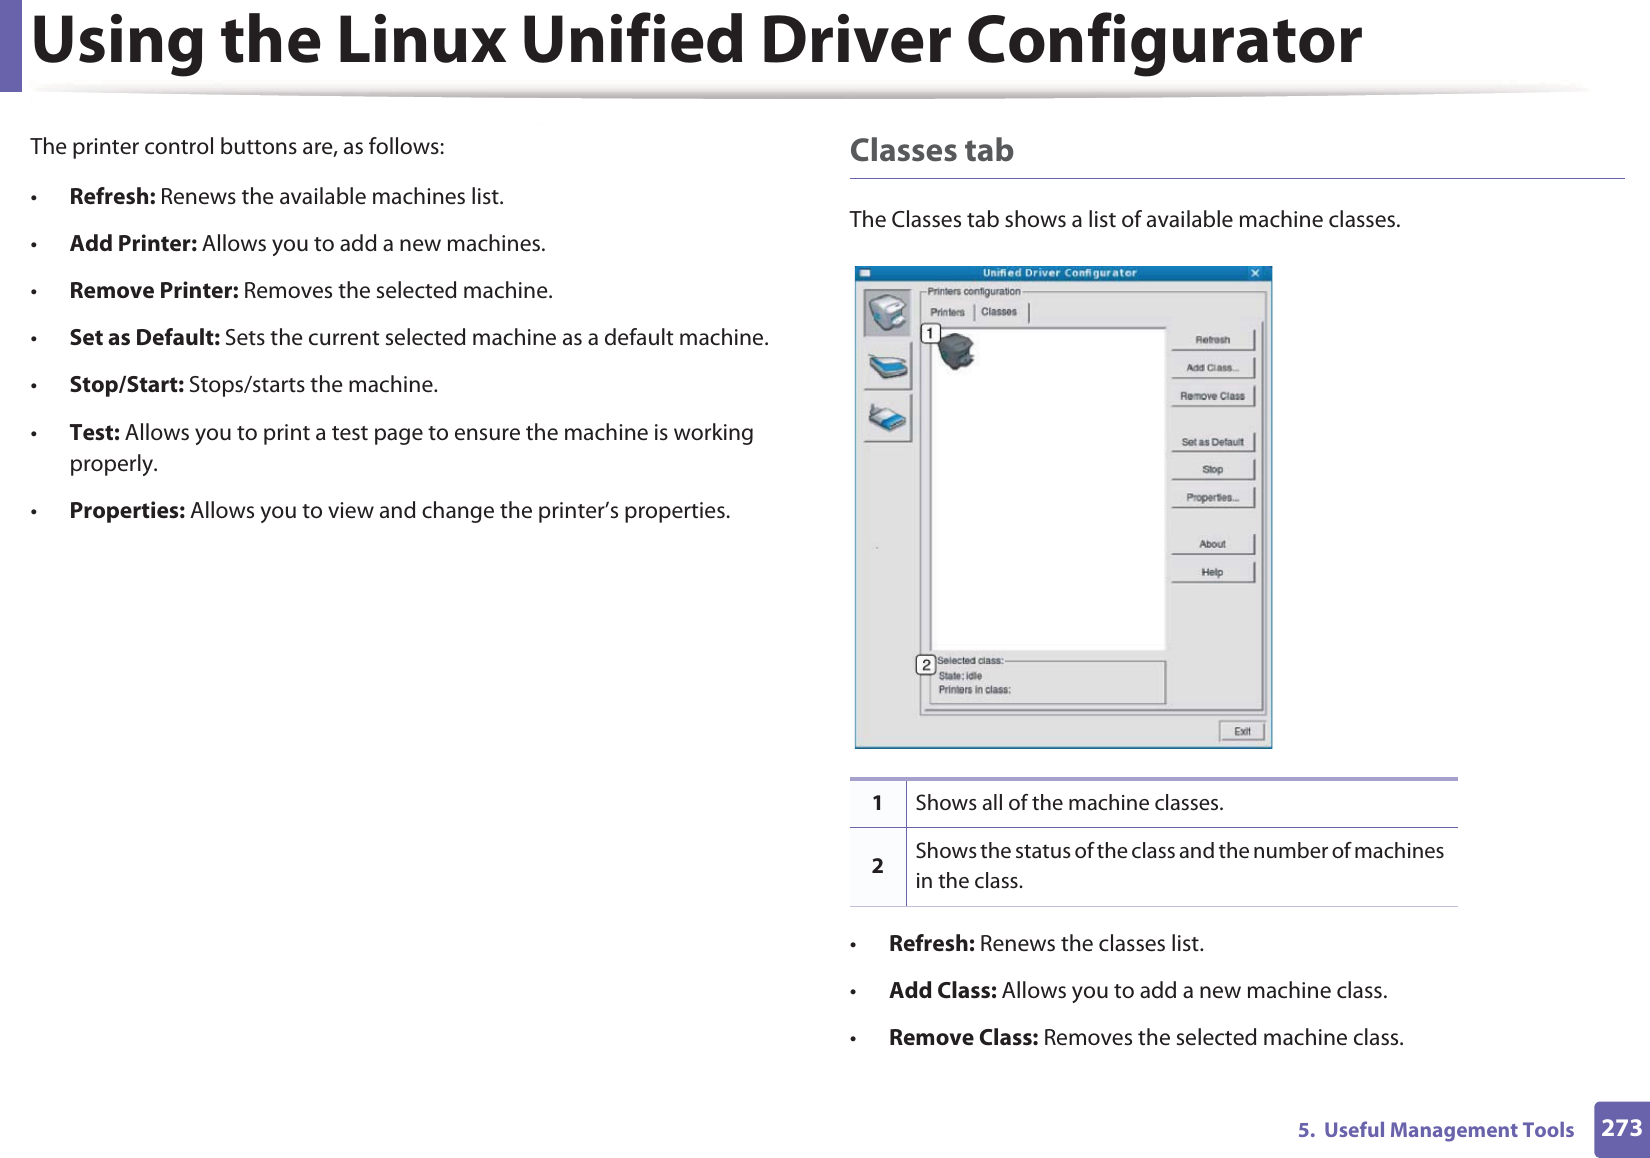 Using the Linux Unified Driver Configurator2735.  Useful Management ToolsThe printer control buttons are, as follows:•Refresh: Renews the available machines list.•Add Printer: Allows you to add a new machines.•Remove Printer: Removes the selected machine.•Set as Default: Sets the current selected machine as a default machine.•Stop/Start: Stops/starts the machine.•Test: Allows you to print a test page to ensure the machine is working properly.•Properties: Allows you to view and change the printer’s properties. Classes tabThe Classes tab shows a list of available machine classes.•Refresh: Renews the classes list.•Add Class: Allows you to add a new machine class.•Remove Class: Removes the selected machine class.1Shows all of the machine classes.2Shows the status of the class and the number of machines in the class.